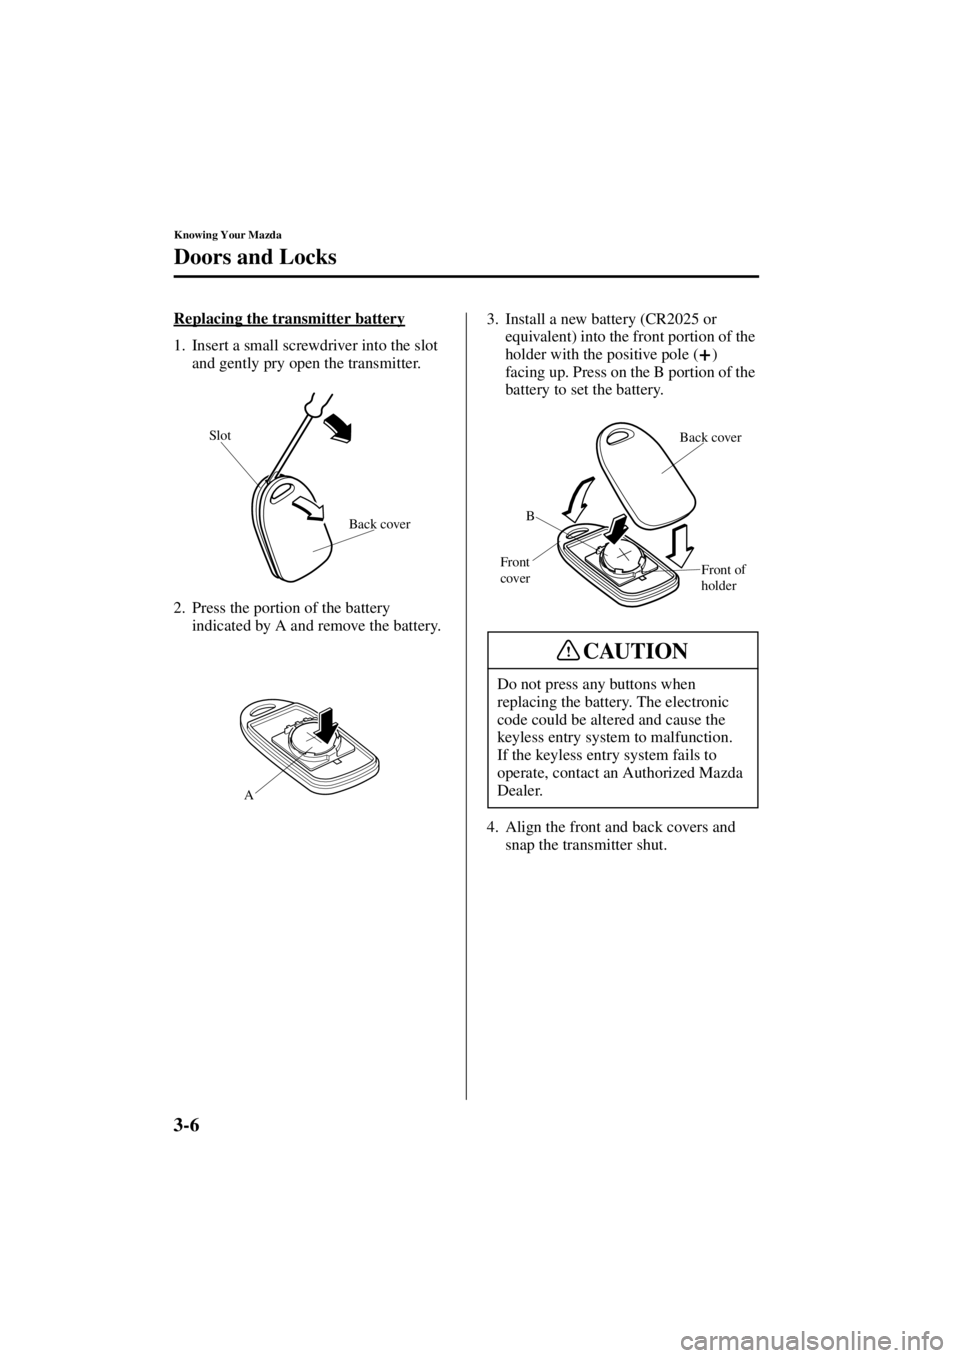 MAZDA MODEL SPEED MX-5 MIATA 2004  Owners Manual 3-6
Knowing Your Mazda
Doors and Locks
Form No. 8T02-EA-03L
Replacing the transmitter battery
1. Insert a small screwdriver into the slot and gently pry open the transmitter.
2. Press the portion of t